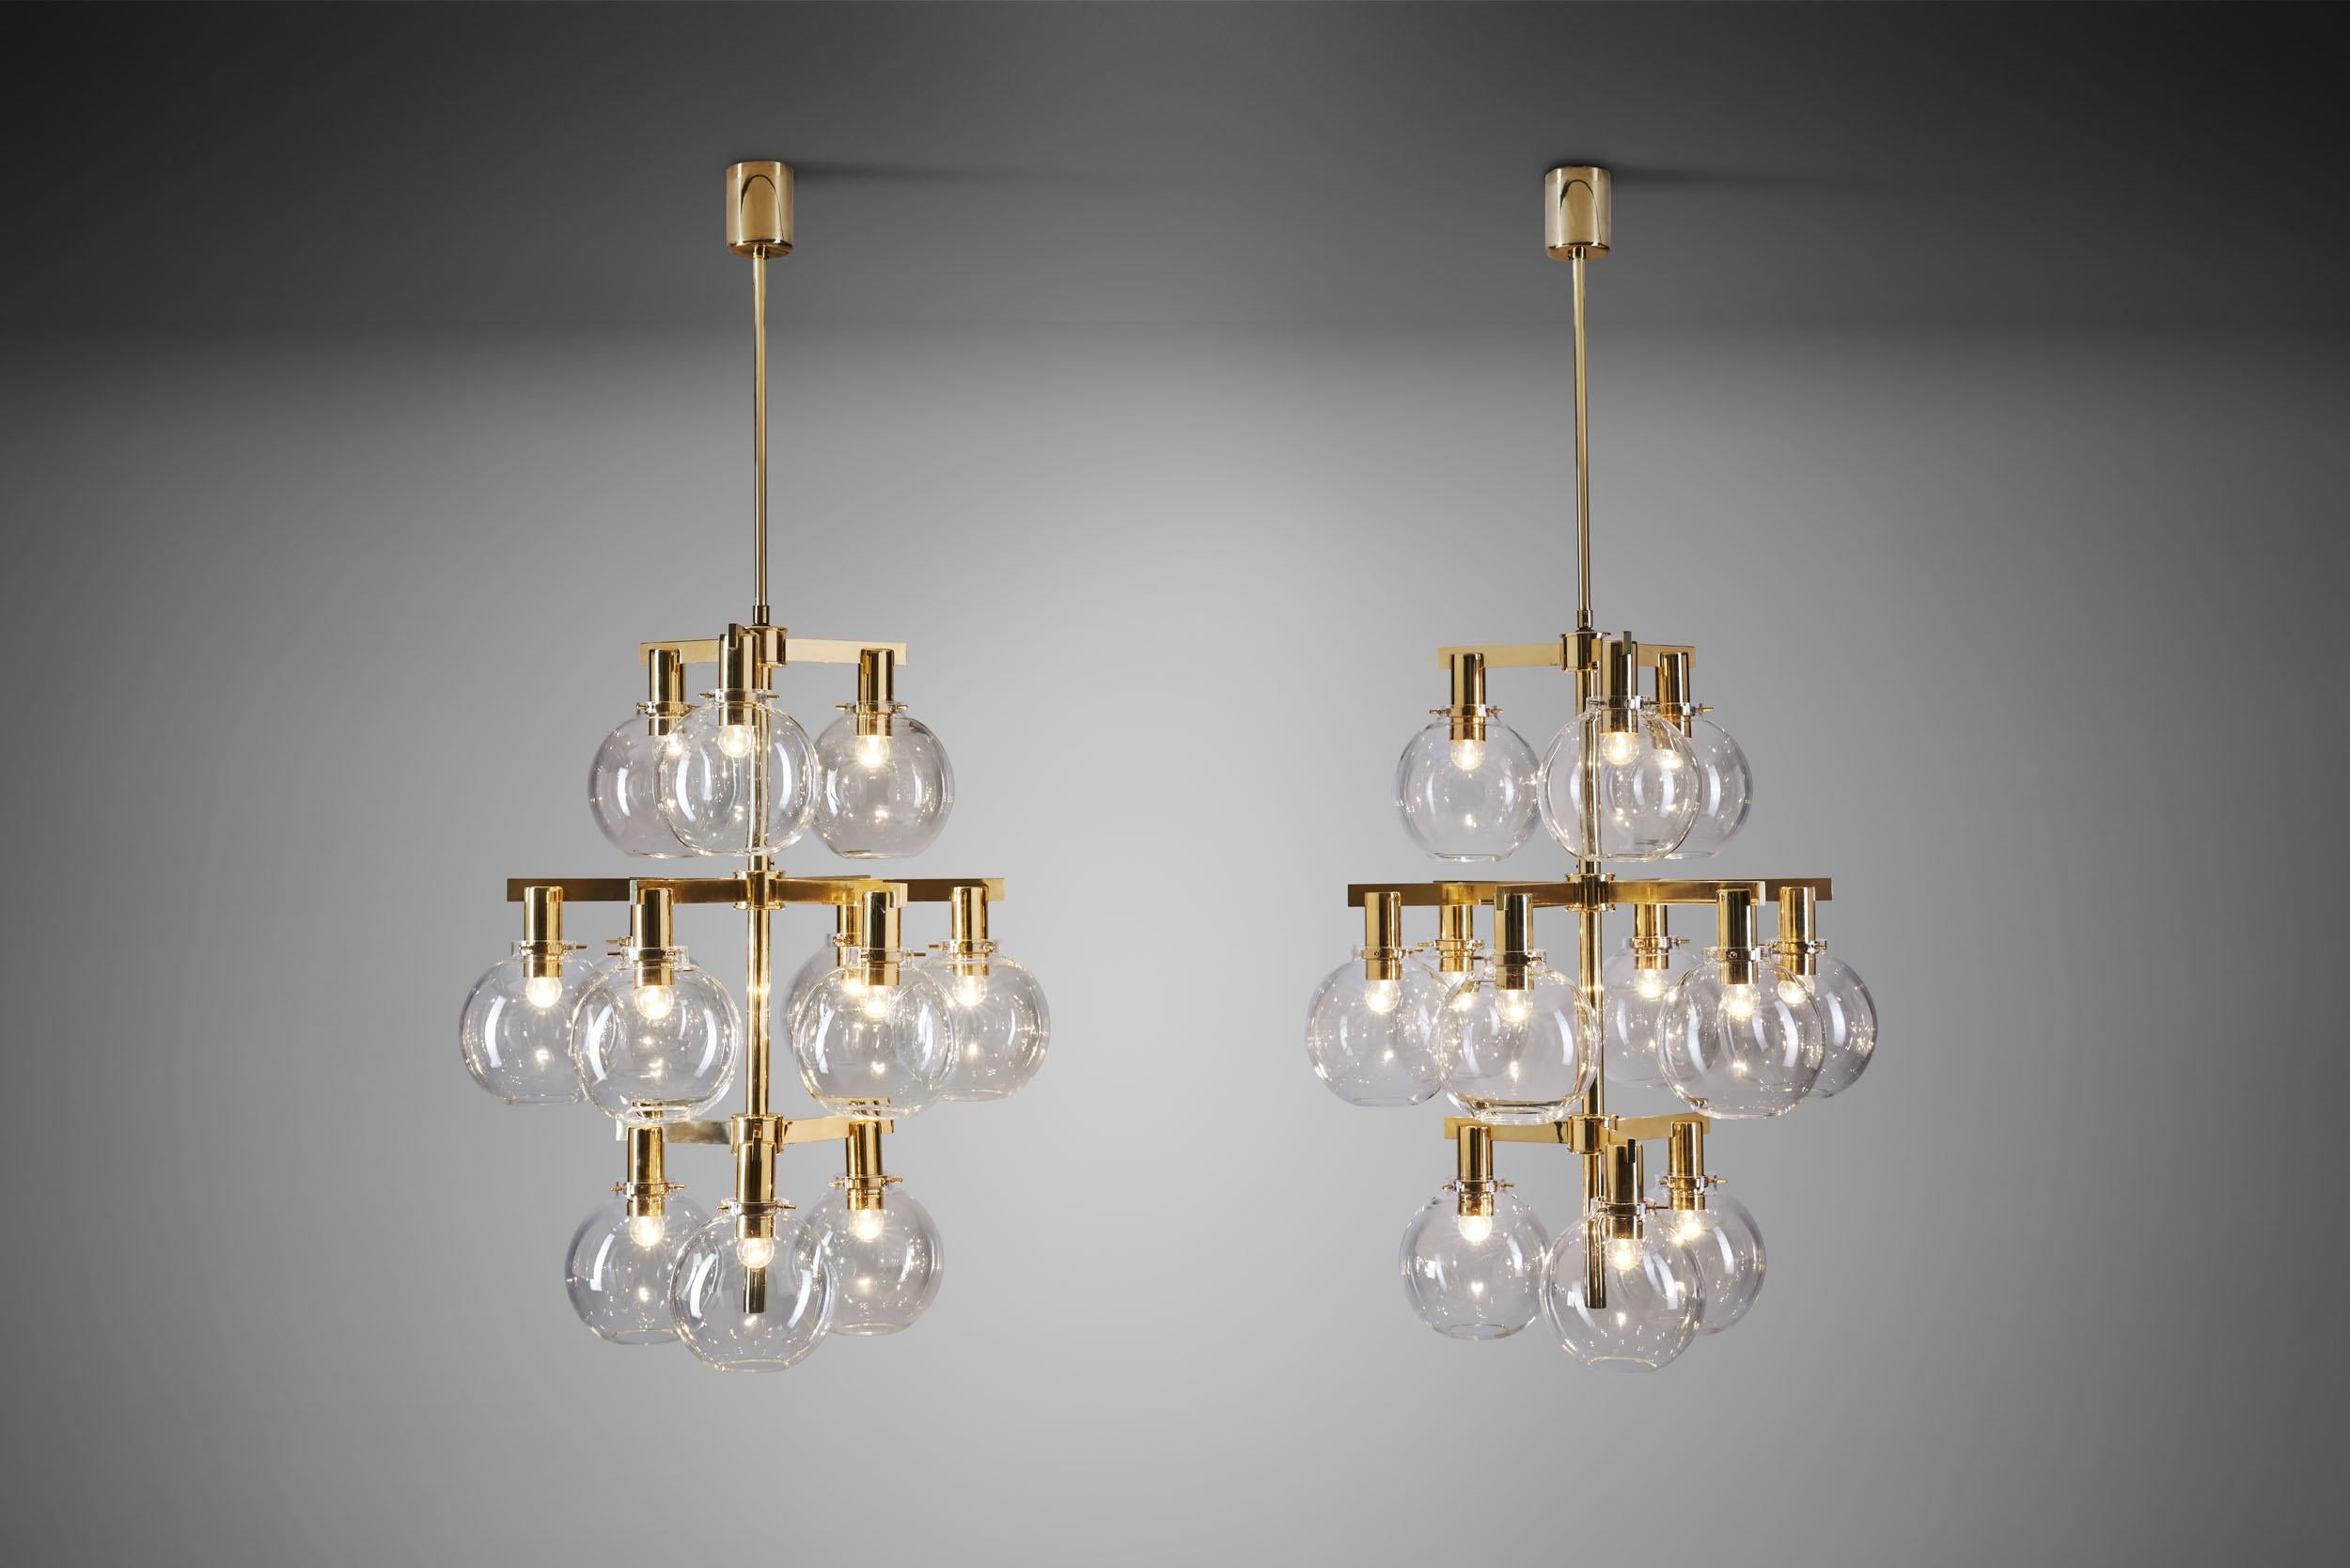 These marvellous pastoral chandeliers are among the most recognizable Swedish lighting designs of the mid-century era. With brass frames holding 12 smoked, translucent glass shades, this model has become synonymous with Hans Agne Jakobsson’s design